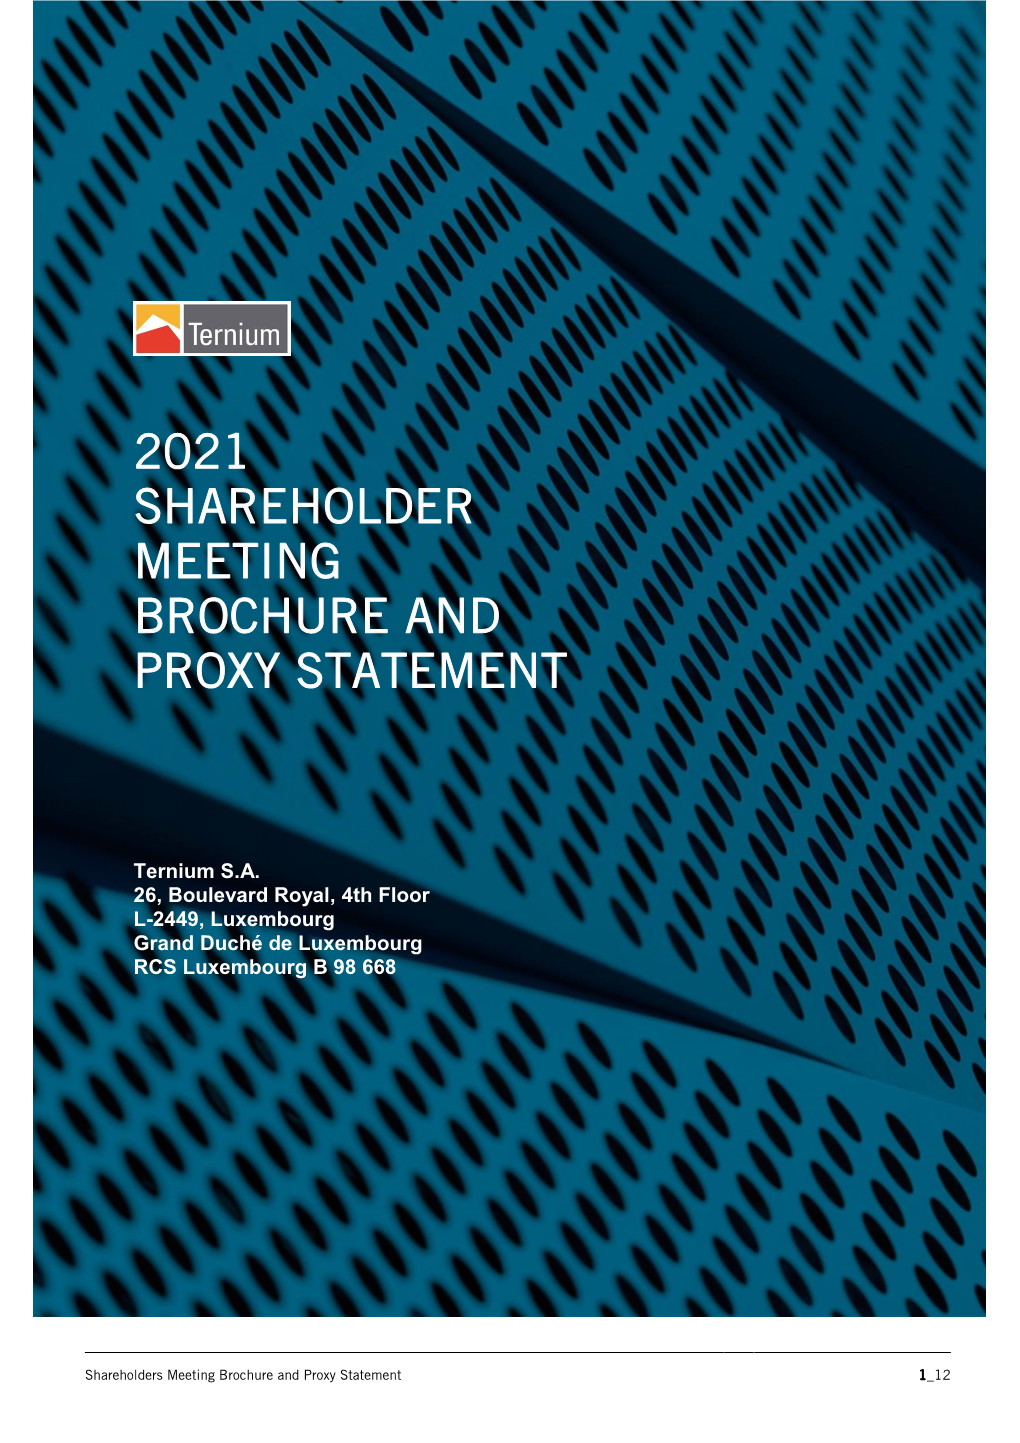 Brochure and Proxy Statement